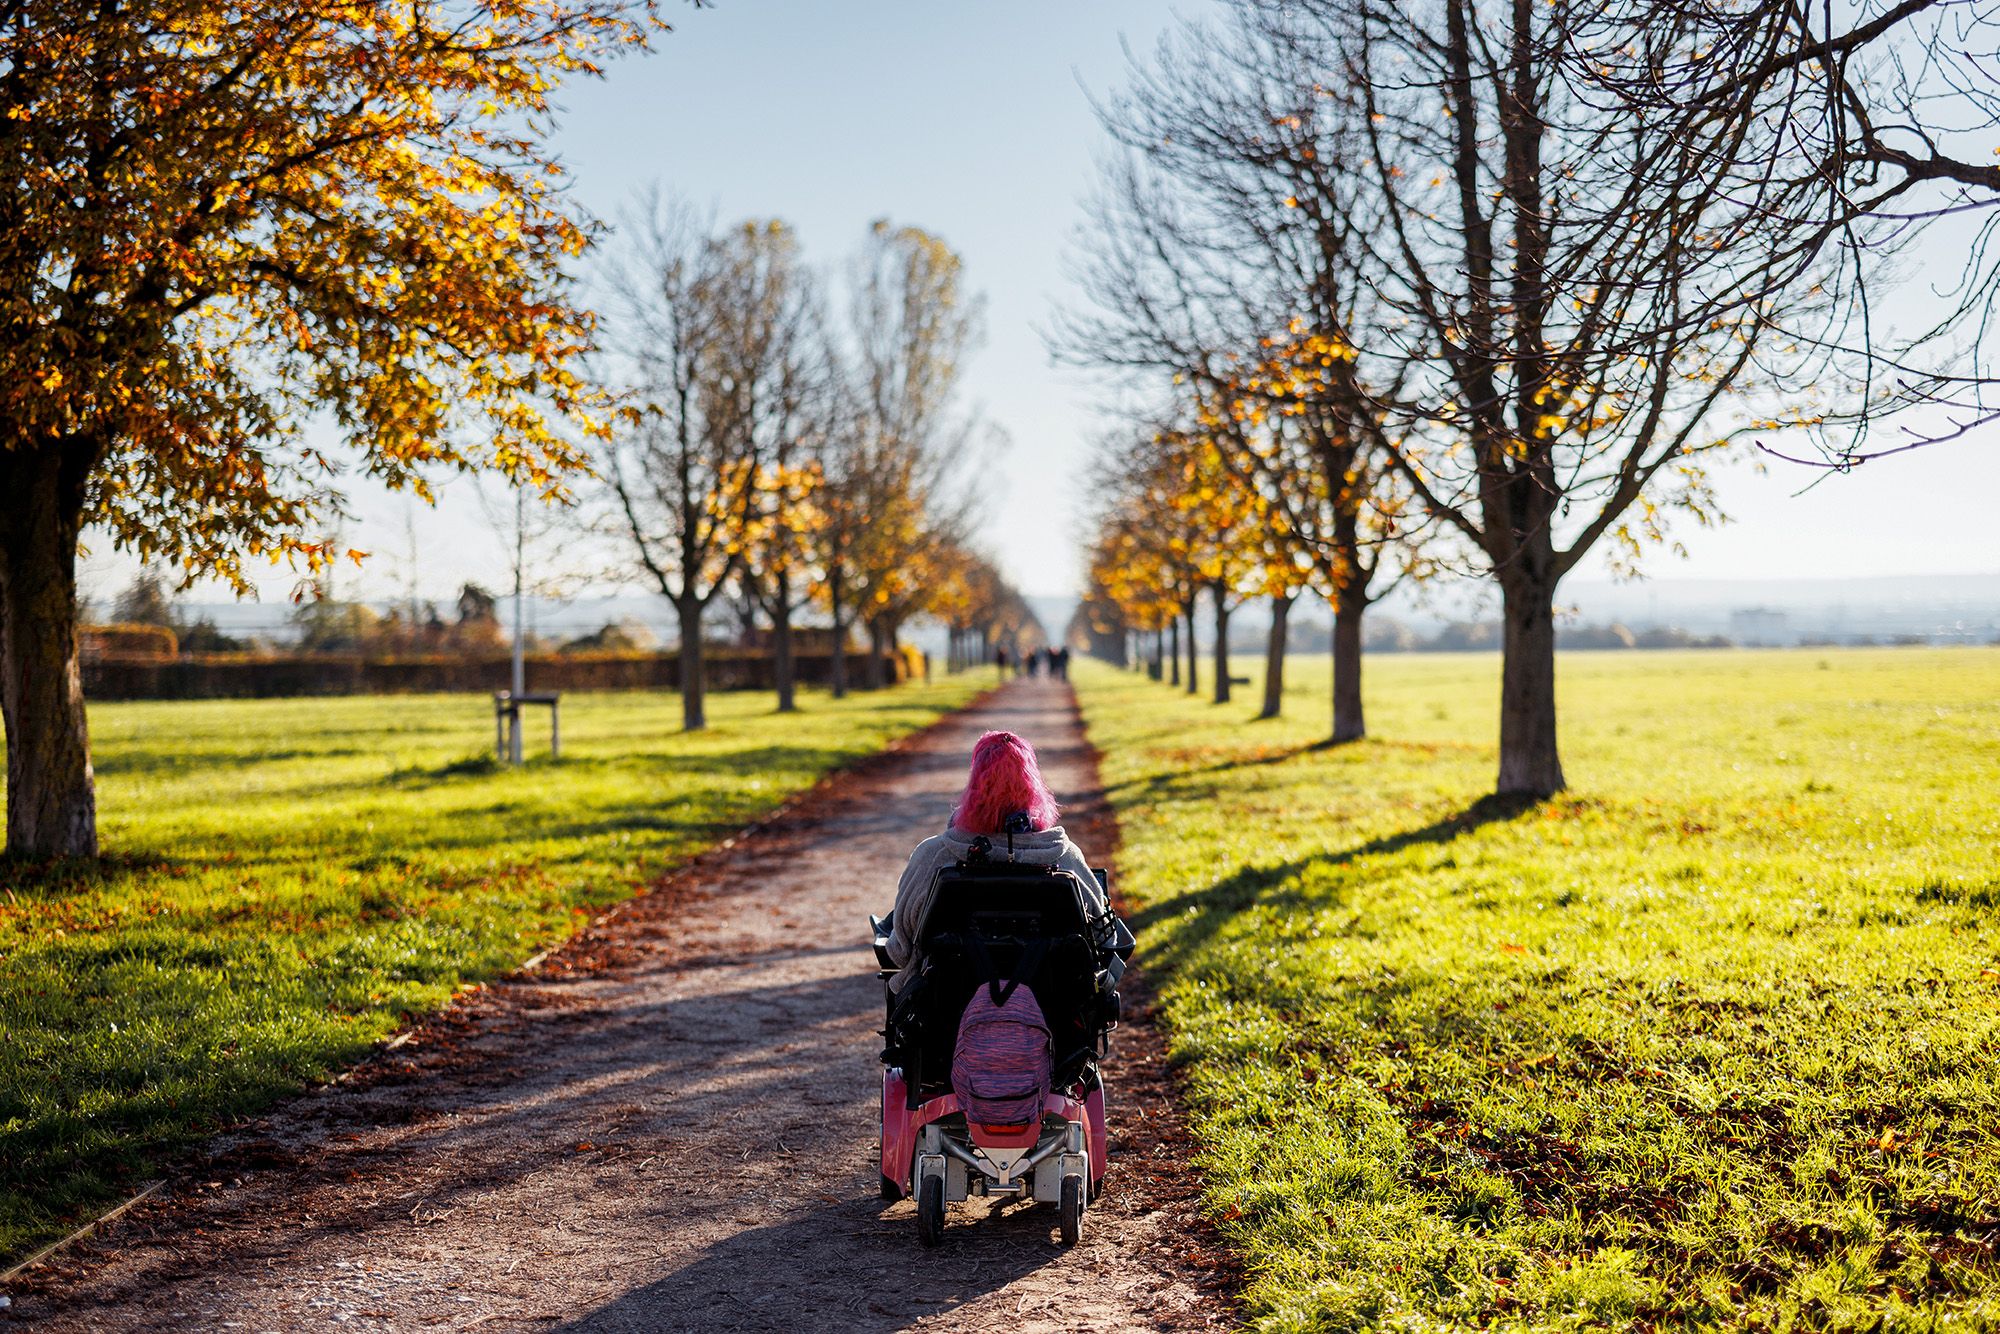 Saskia riding in her wheelchair down a tree lined dirt road, green grass on either side